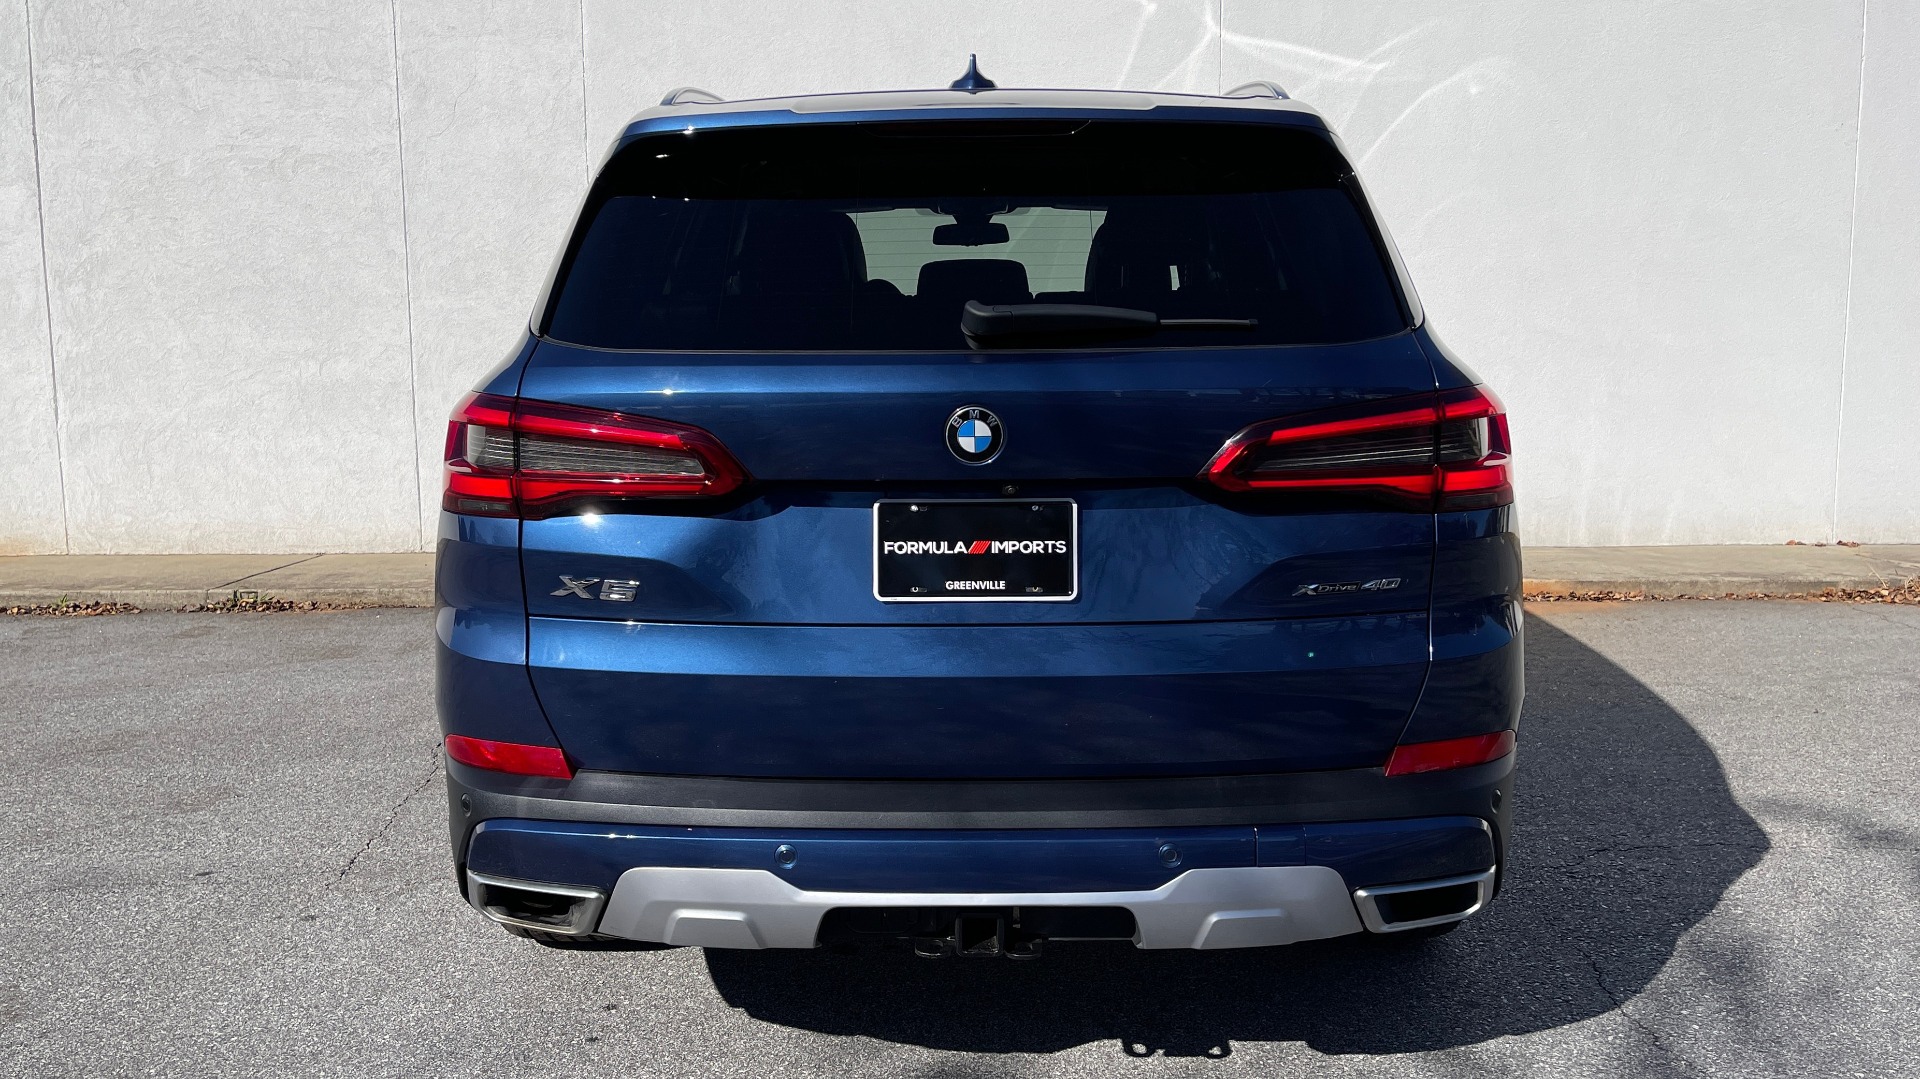 Used 2019 BMW X5 XDRIVE40I / CONVENIENCE PKG / REMOTE START / TOWING / H/K SND / REARVIEW for sale $57,395 at Formula Imports in Charlotte NC 28227 22